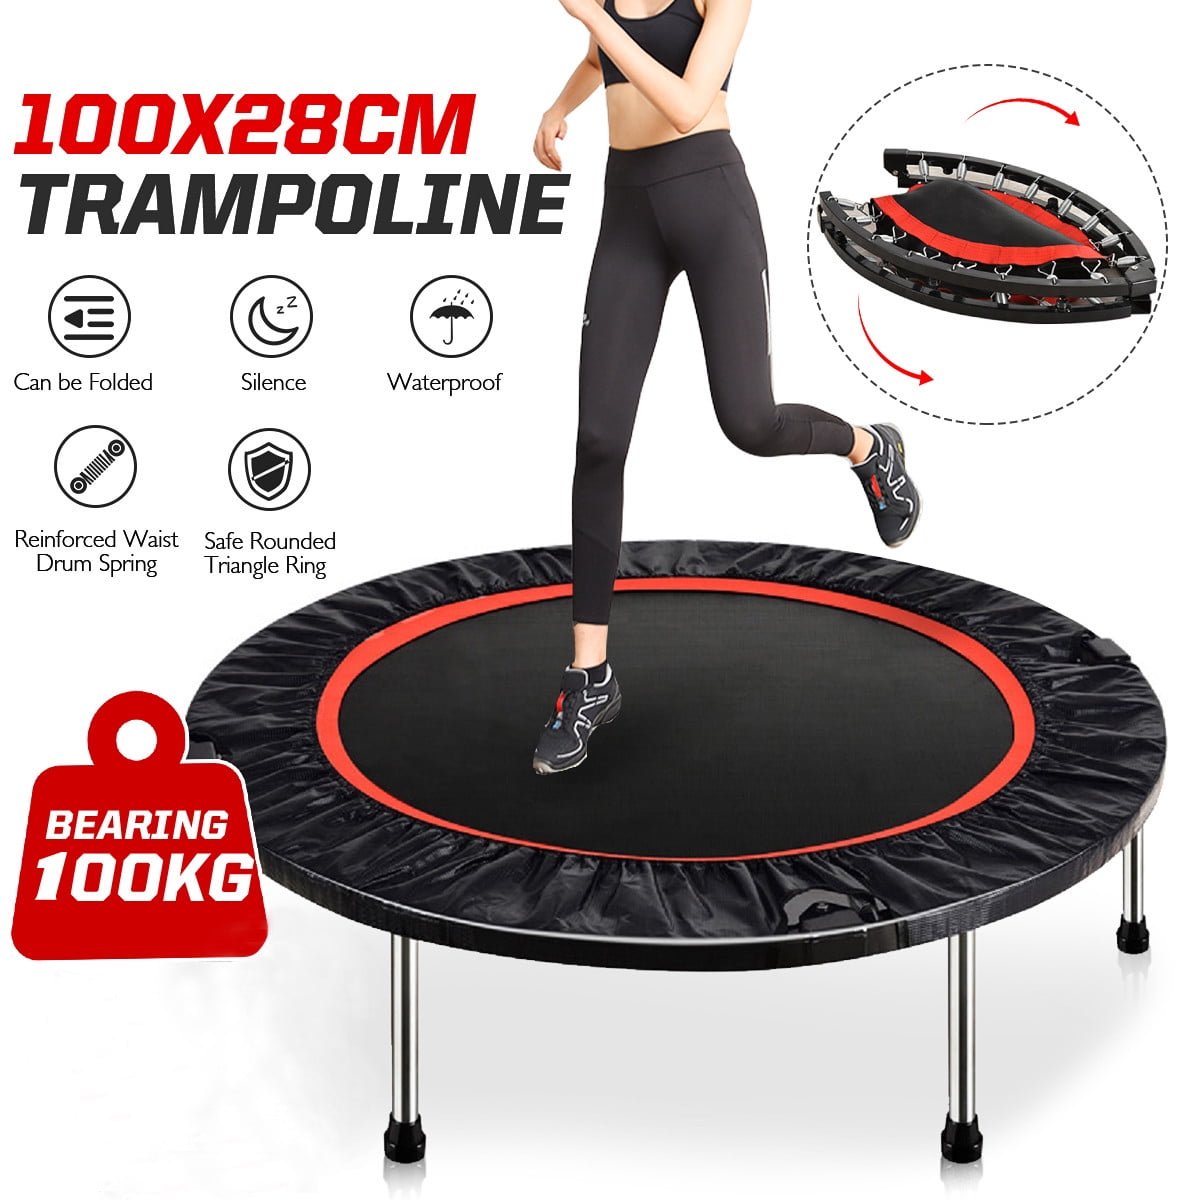 40" Folding Silent Exercise Trampoline Round Trampoline Safety Indoor Outdoor Bouncer for Kids Adults Garden Workout , Max Load 220 lbs